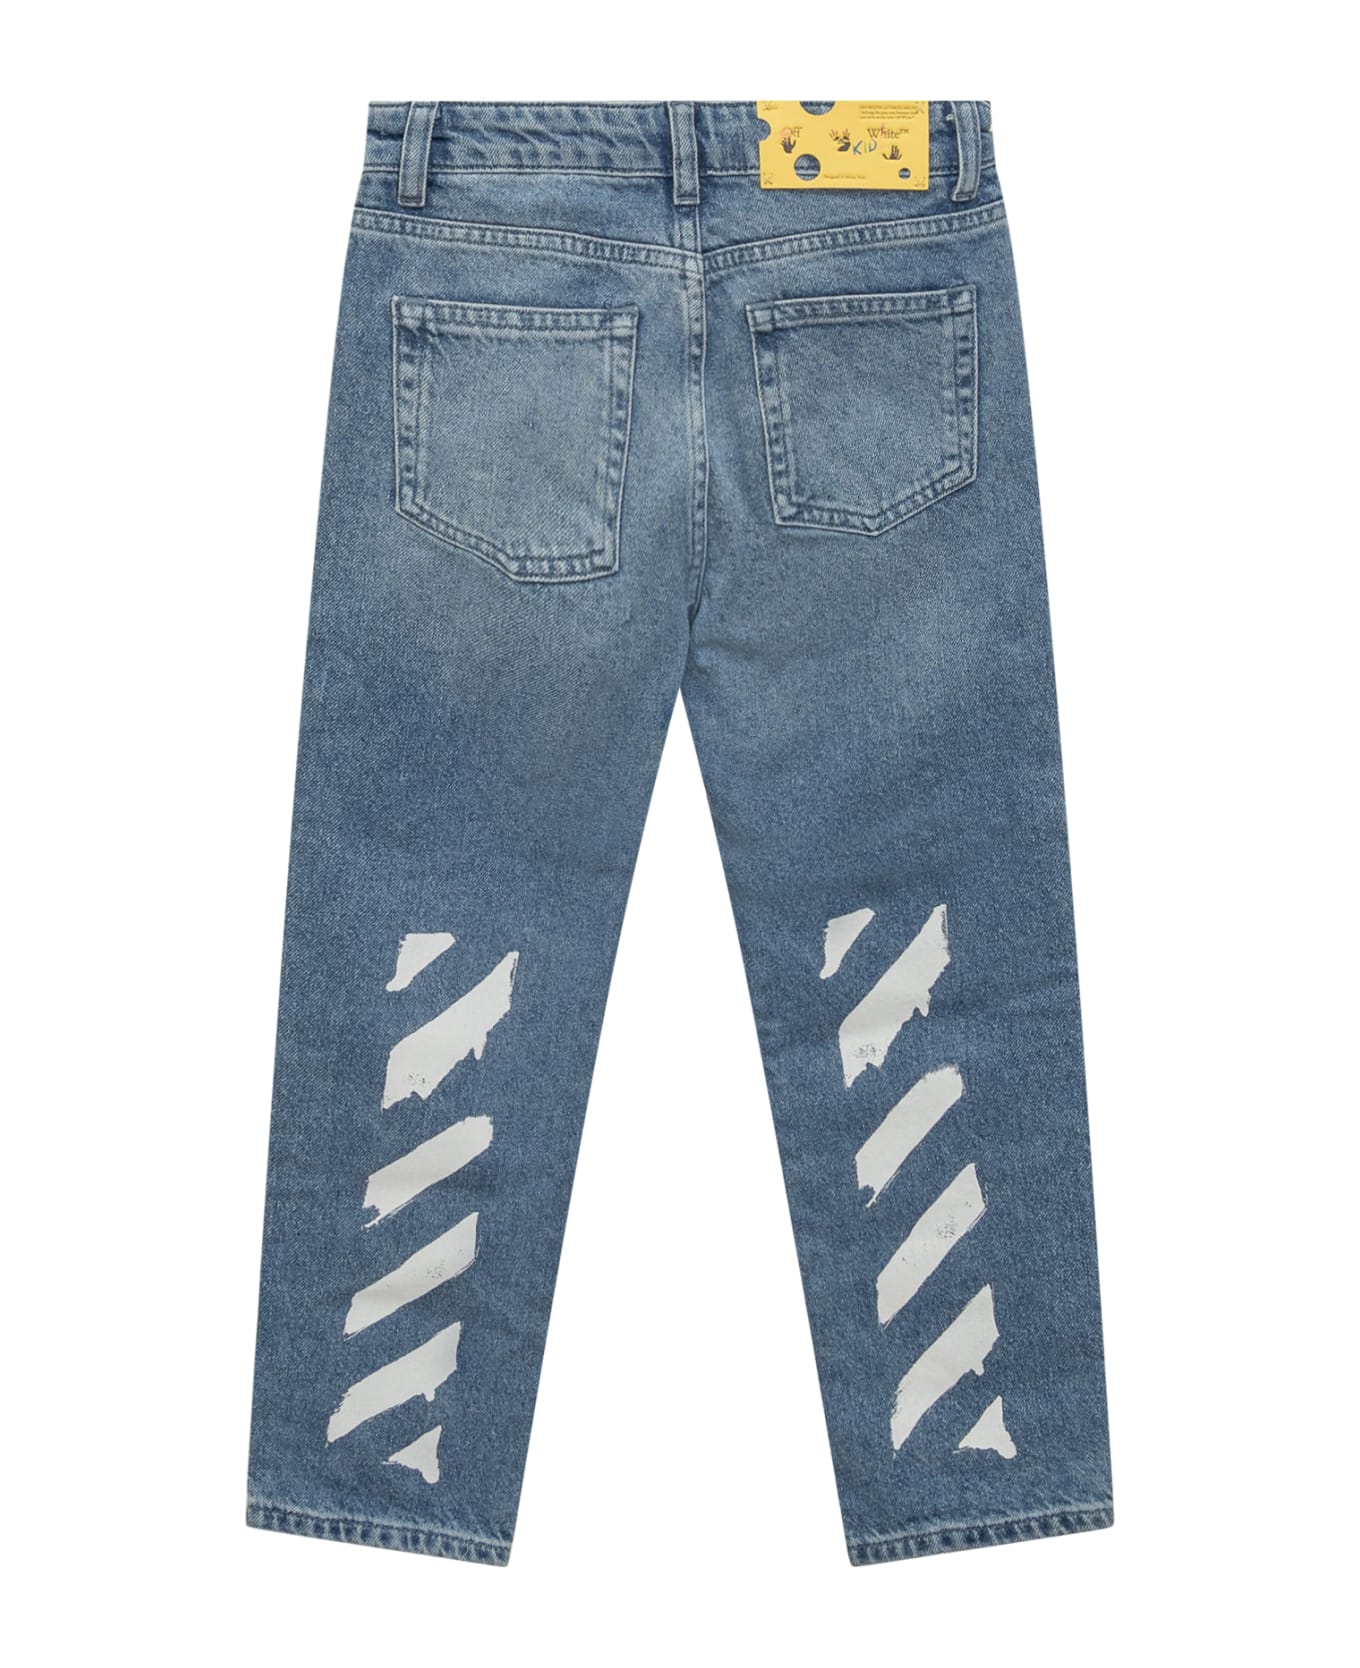 Off-White Paint Graphic Jeans - MEDIUM BLUE ボトムス